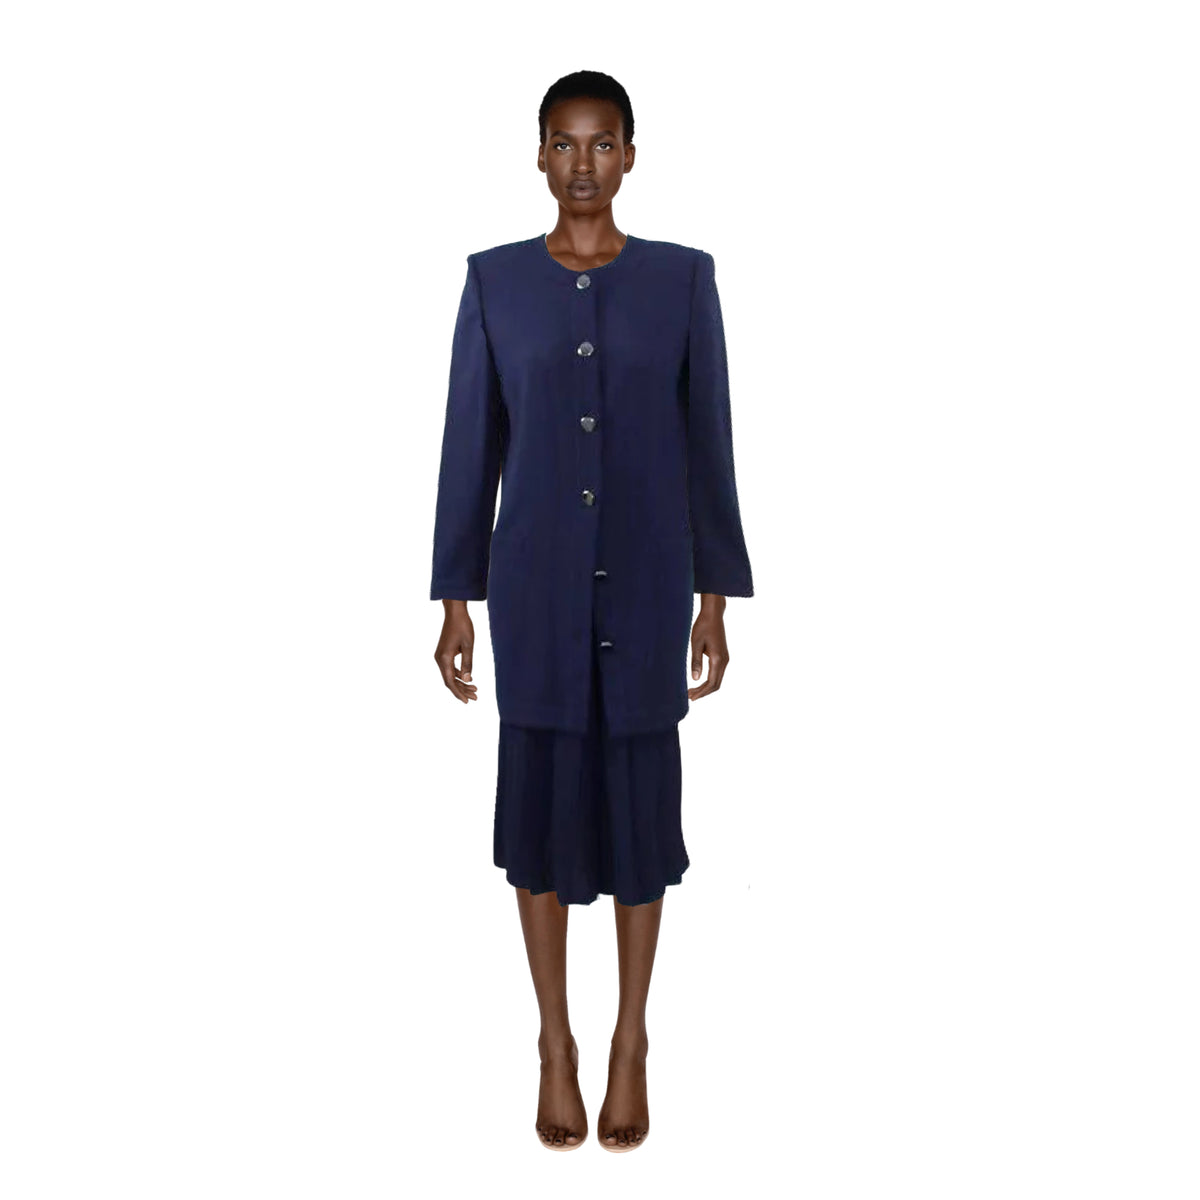 CHLOE Navy Blue Wool Crepe Jacket and Pleated Culottes & Gaucho Pants Ensemble | Size S/M